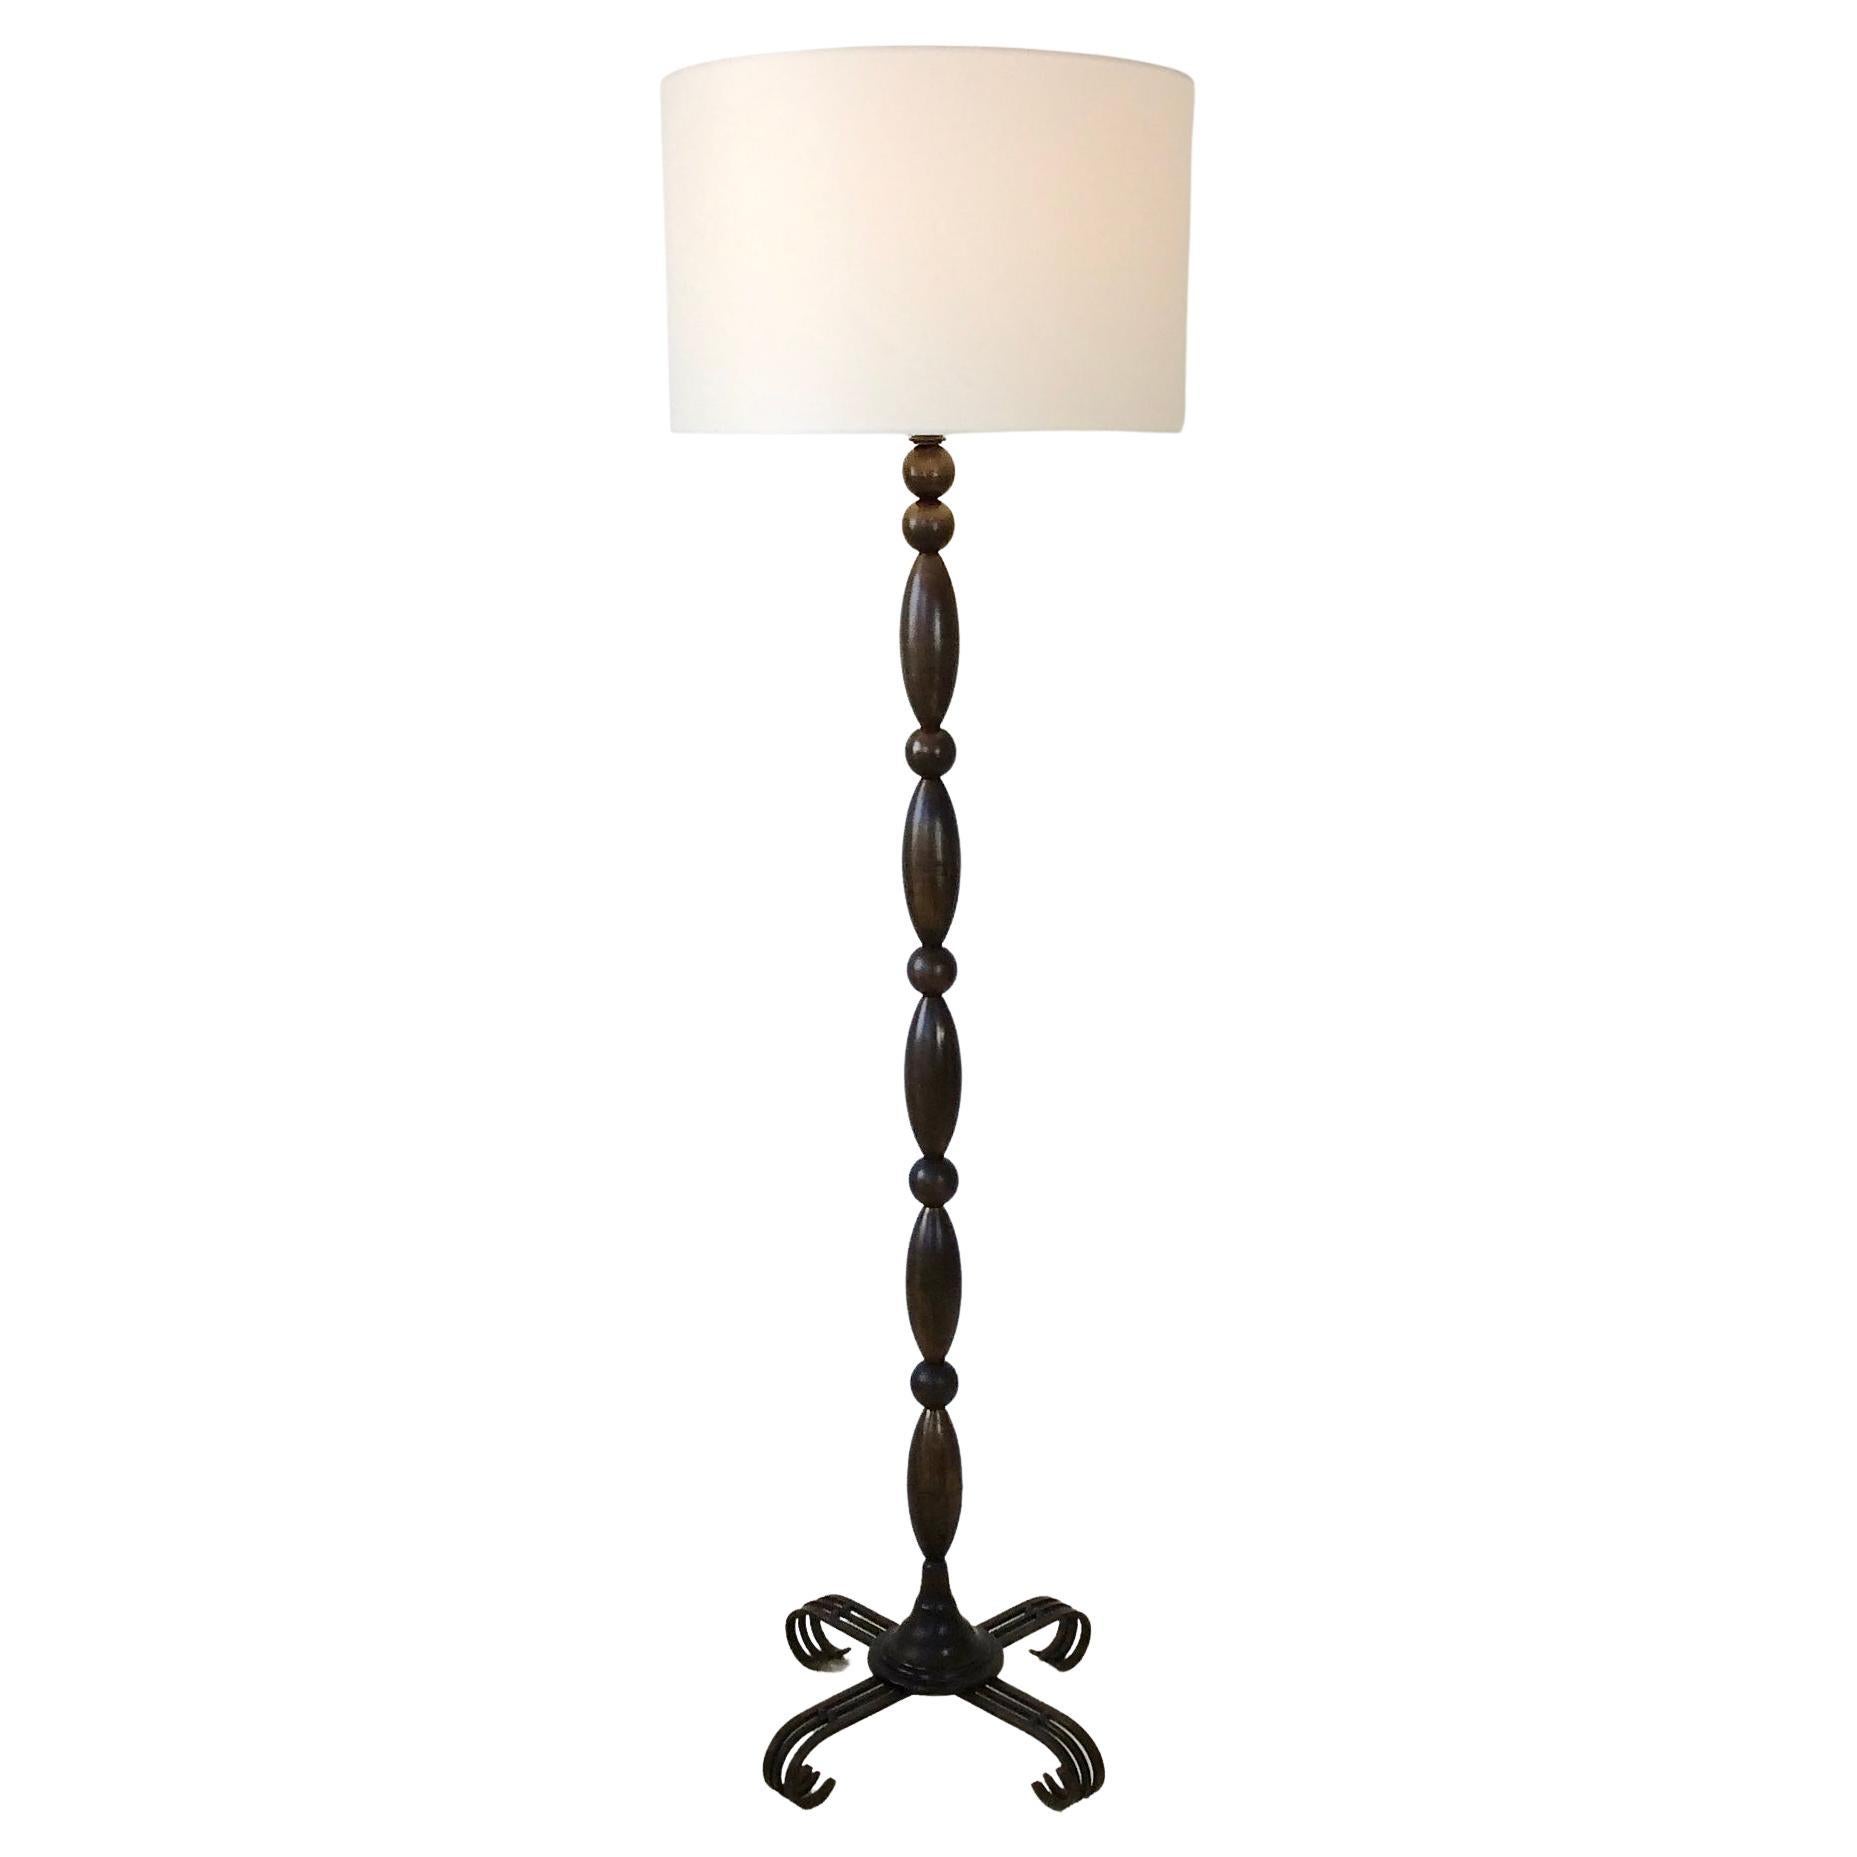 Elegant Art Deco floor lamp, circa 1940, France.
Bronze patinated metal, new ivory fabric shade.
Rewired.One E27 bulb of 60W.
Dimensions: 178 cm H, 53 cm diameter.
All purchases are covered by our Buyer Protection Guarantee.
This item can be